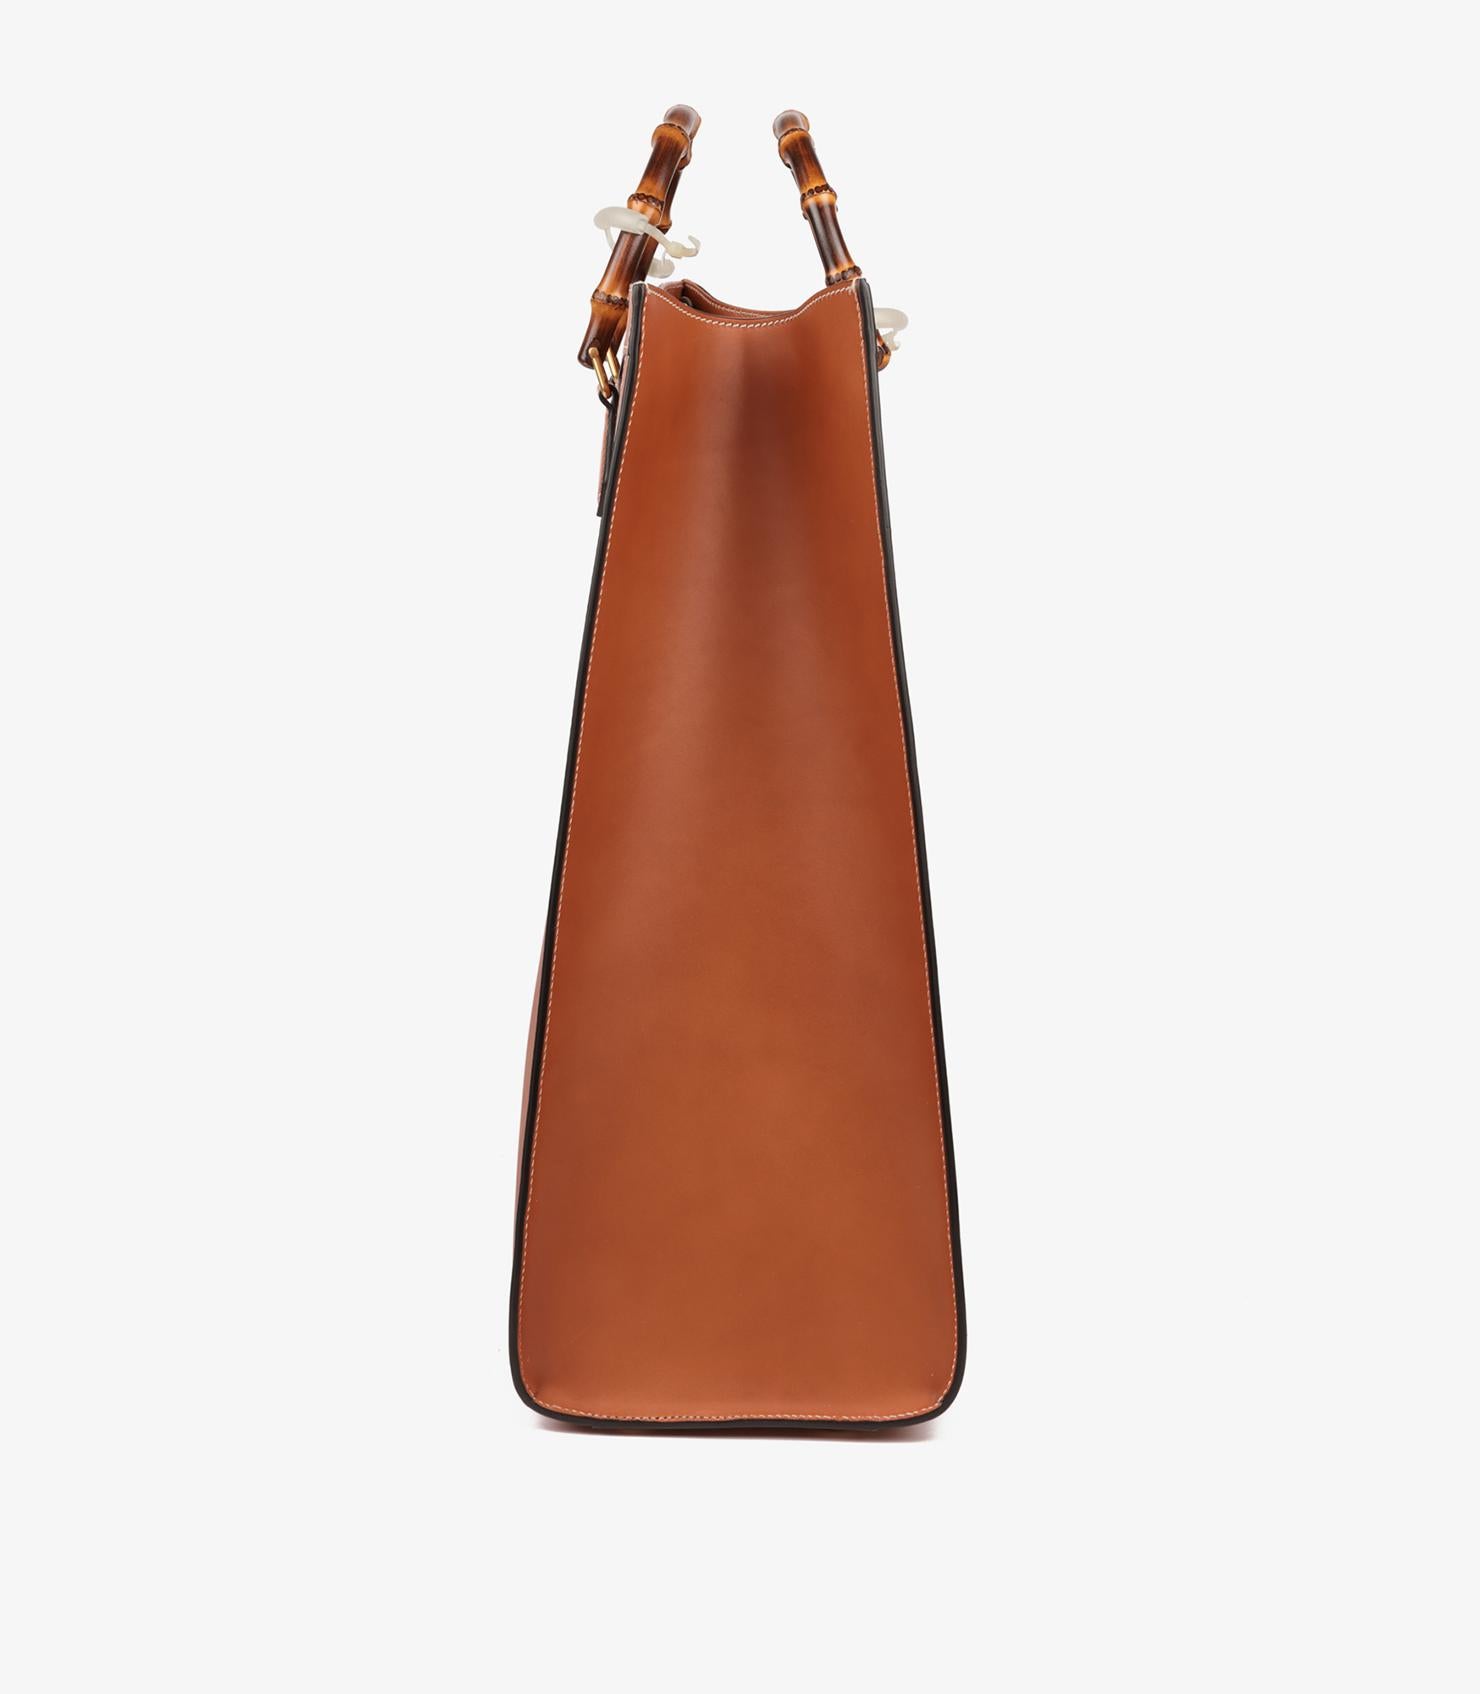 Gucci Brown Calfskin Leather Maxi Diana

Brand- Gucci
Model- Maxi Diana 
Product Type- Tote
Serial Number- 719289.525
Age- Circa 2022
Accompanied By- Gucci Dust Bag, Box, Shoulder Straps
Colour- Brown
Hardware- Antiqued Gold 
Material(s)- Calfskin